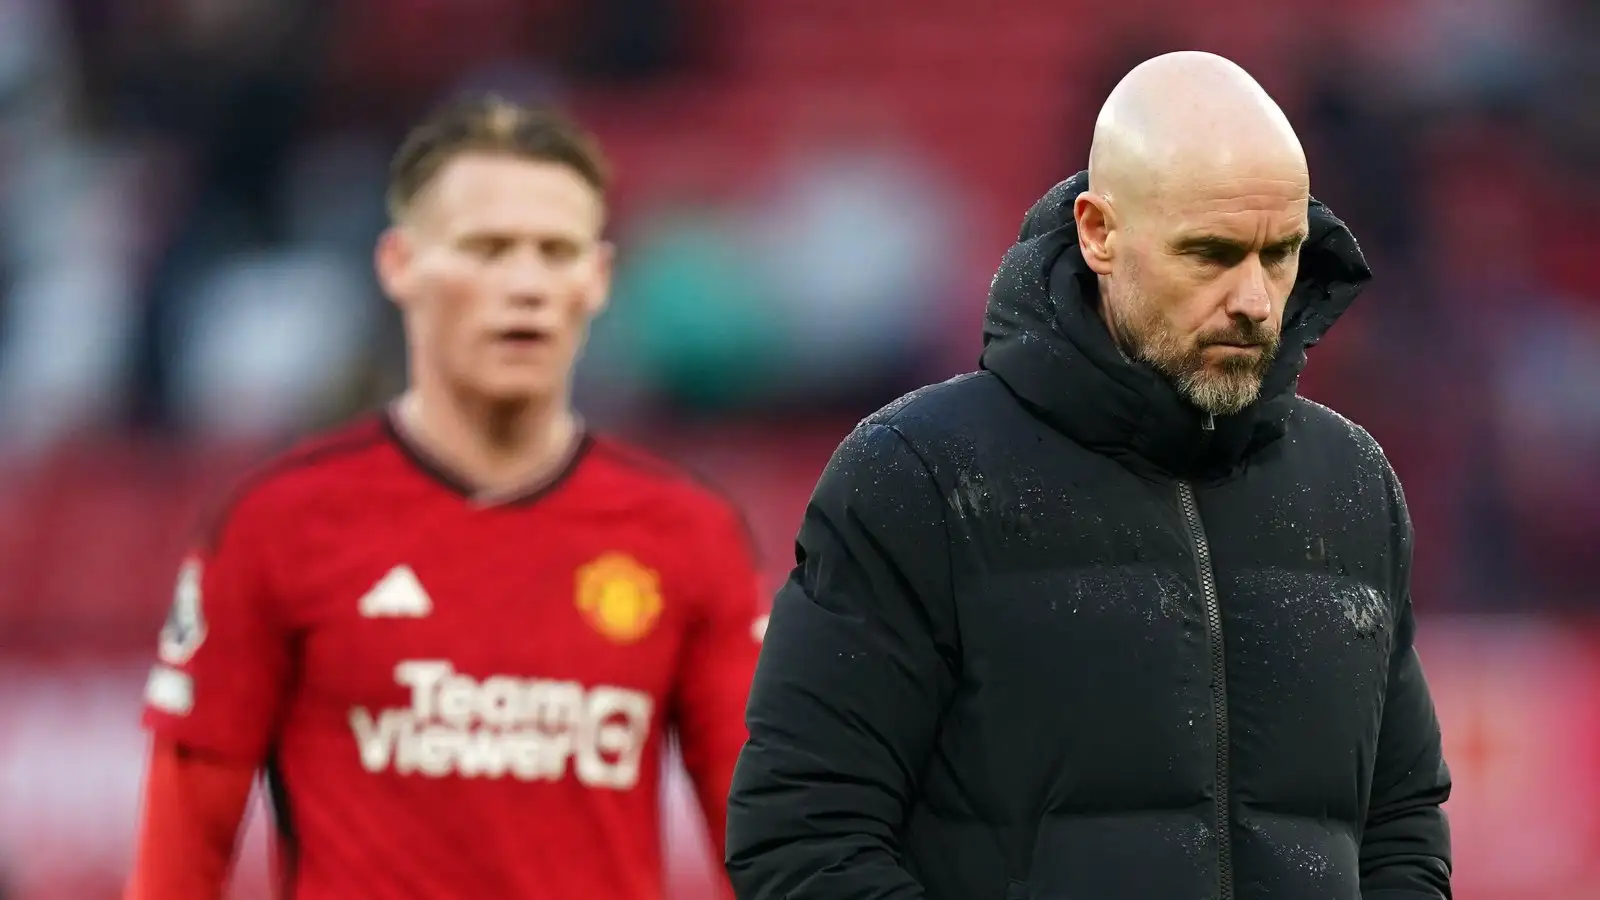 Ten Hag finally exposed as 'a fraud' and Man Utd have been 'lucky' to have the Glazers as owners